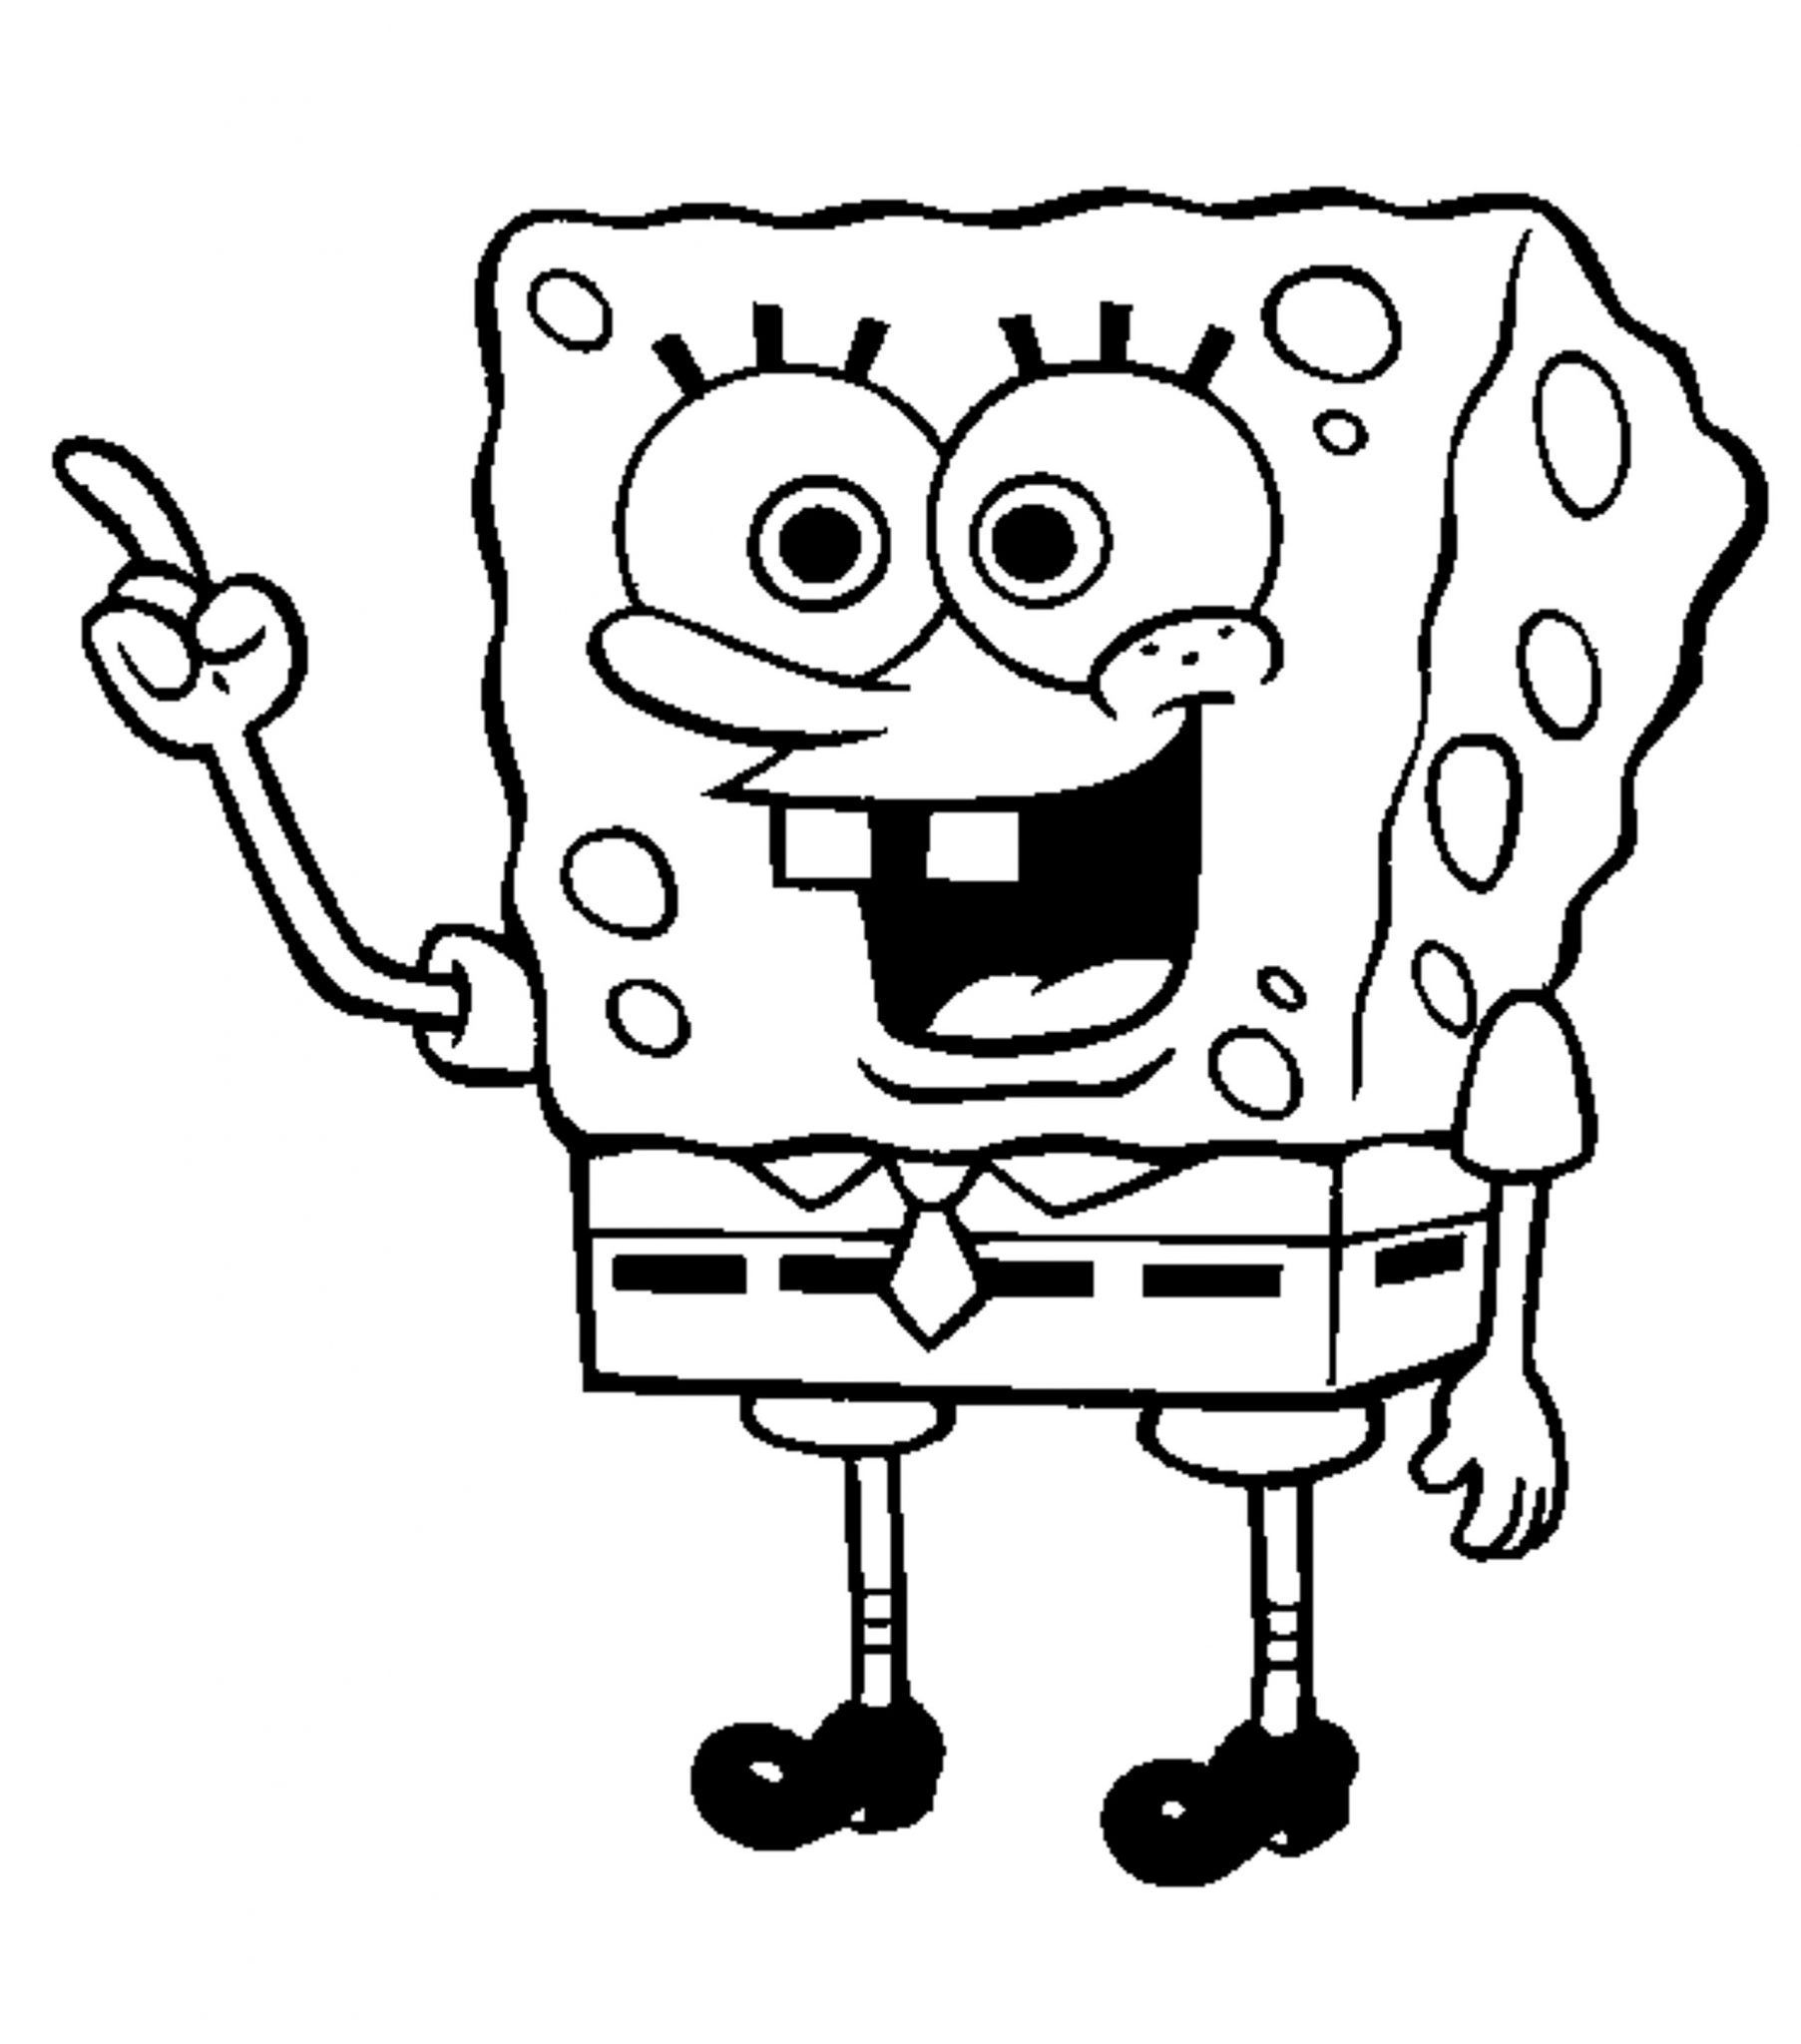 Print & Download Choosing SpongeBob Coloring Pages For Your Children